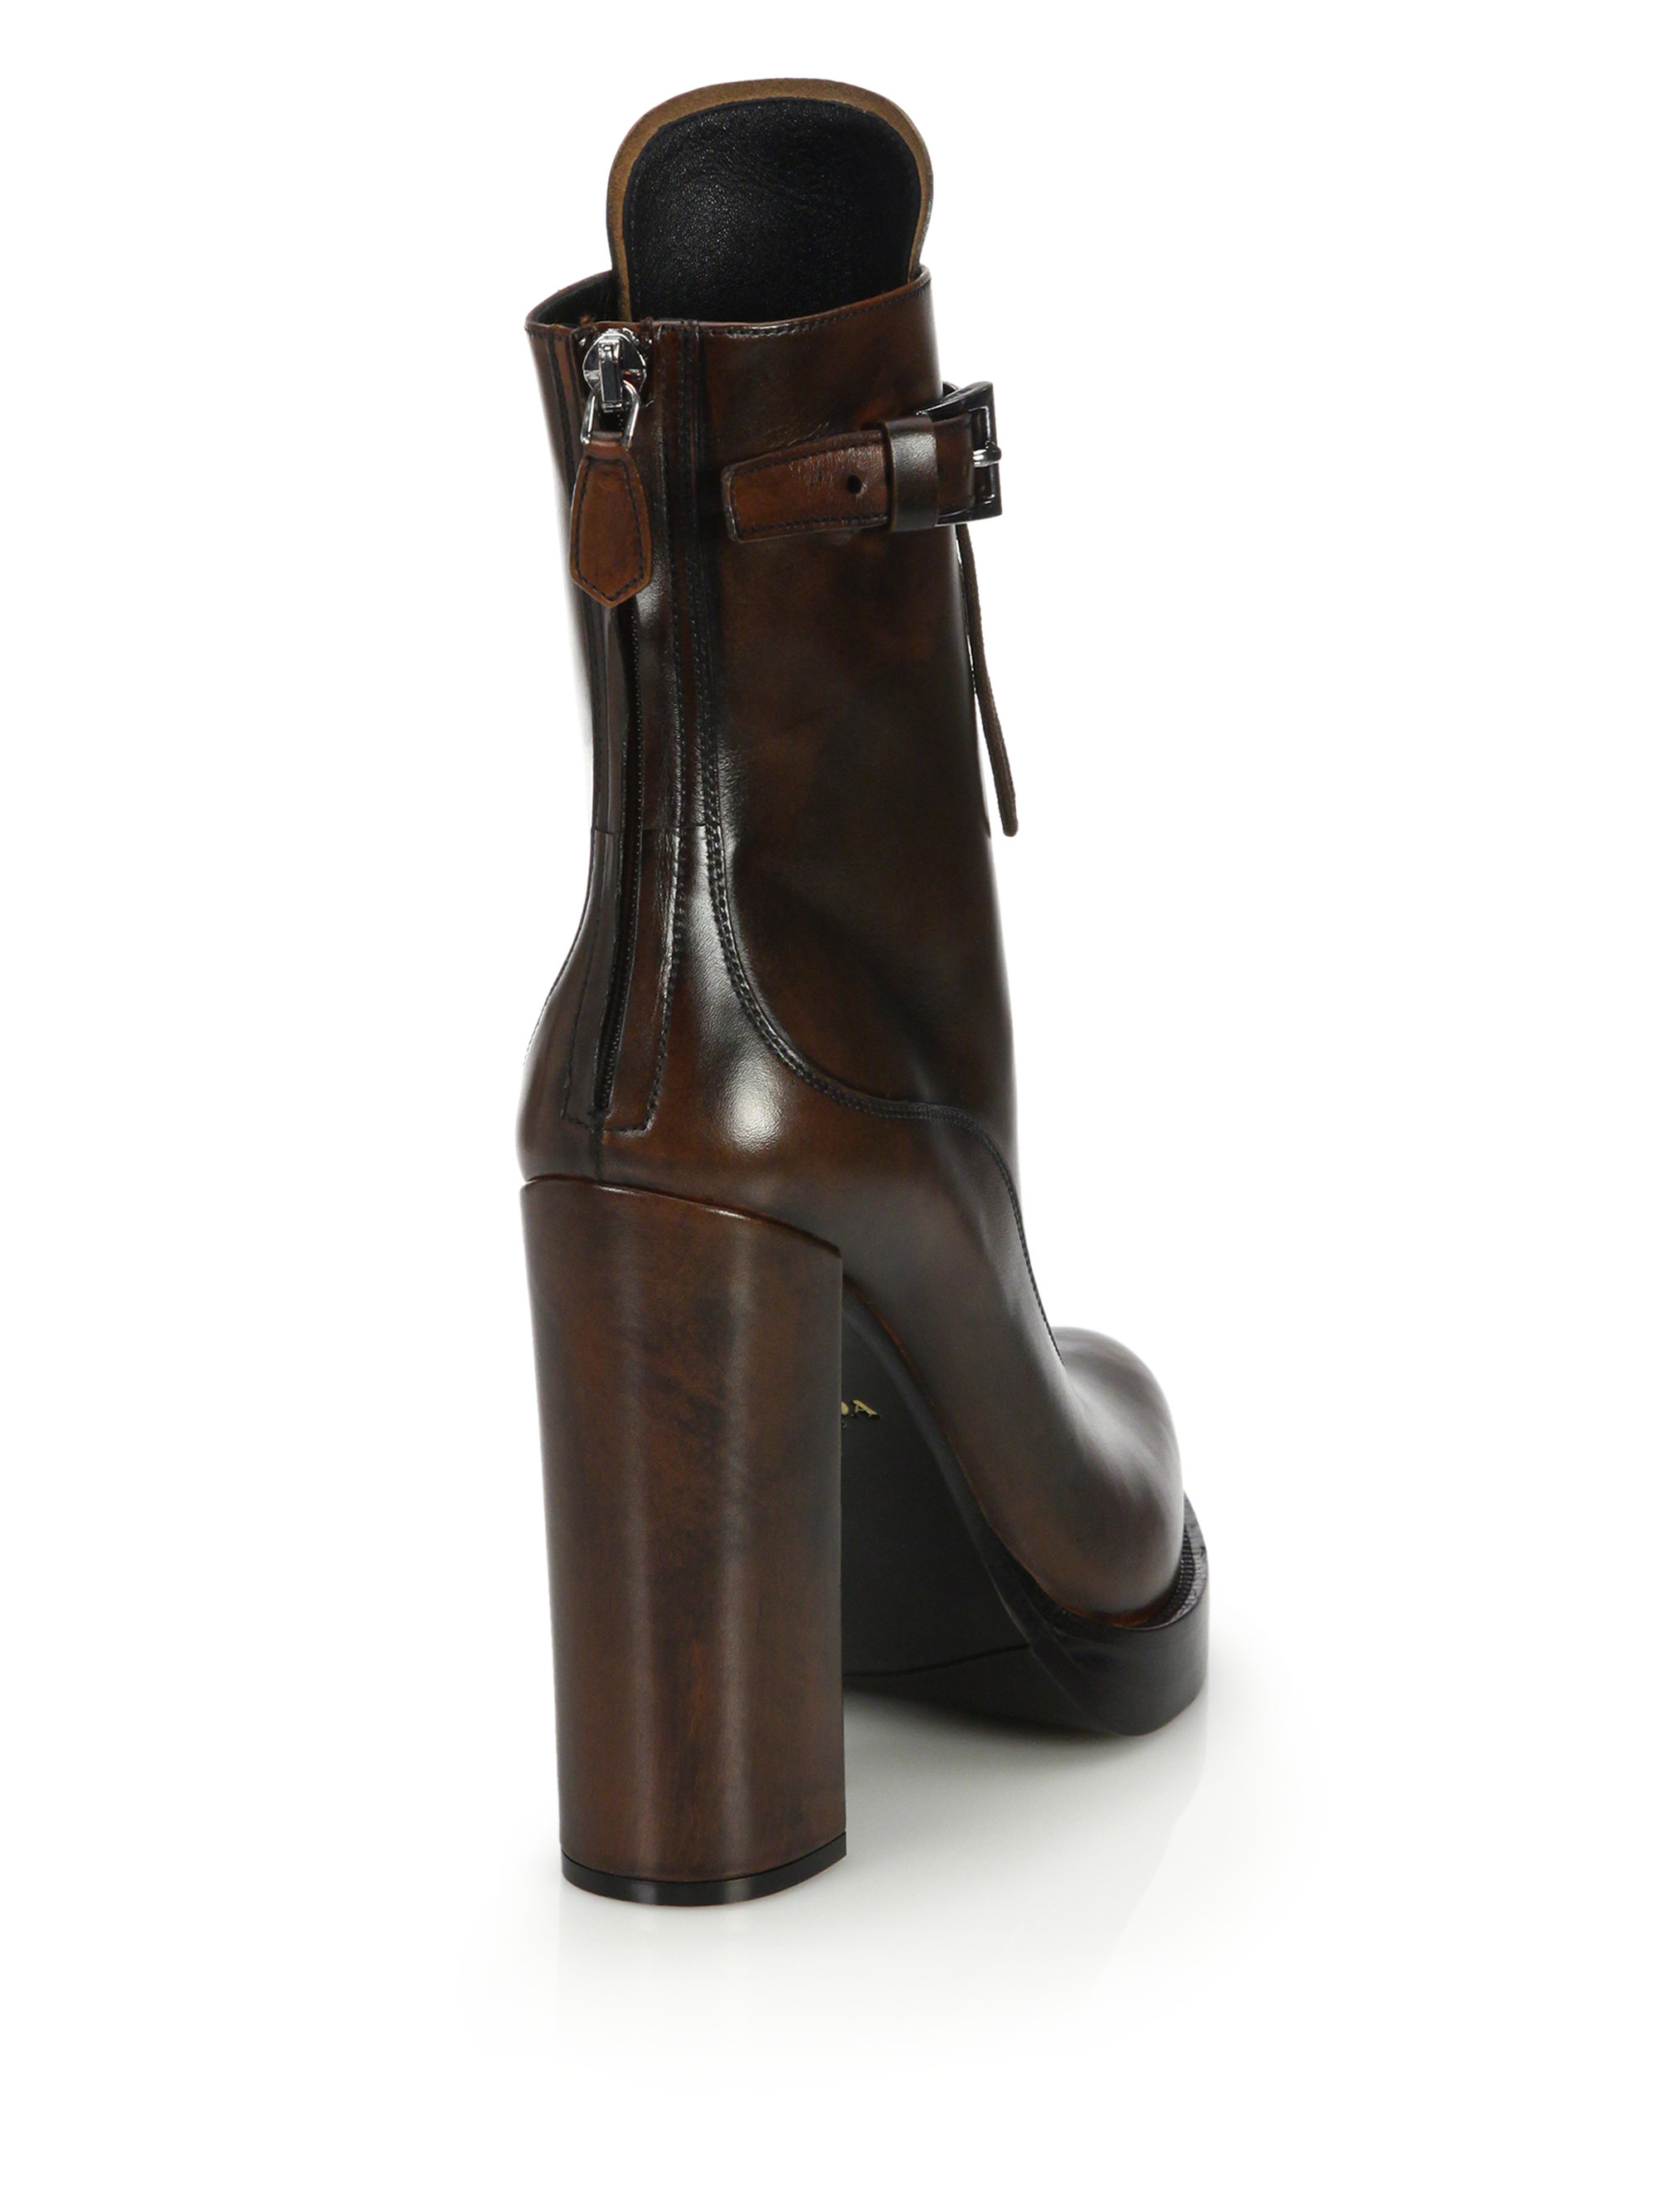 Prada Burnished Leather Lace-up Booties in Brown | Lyst